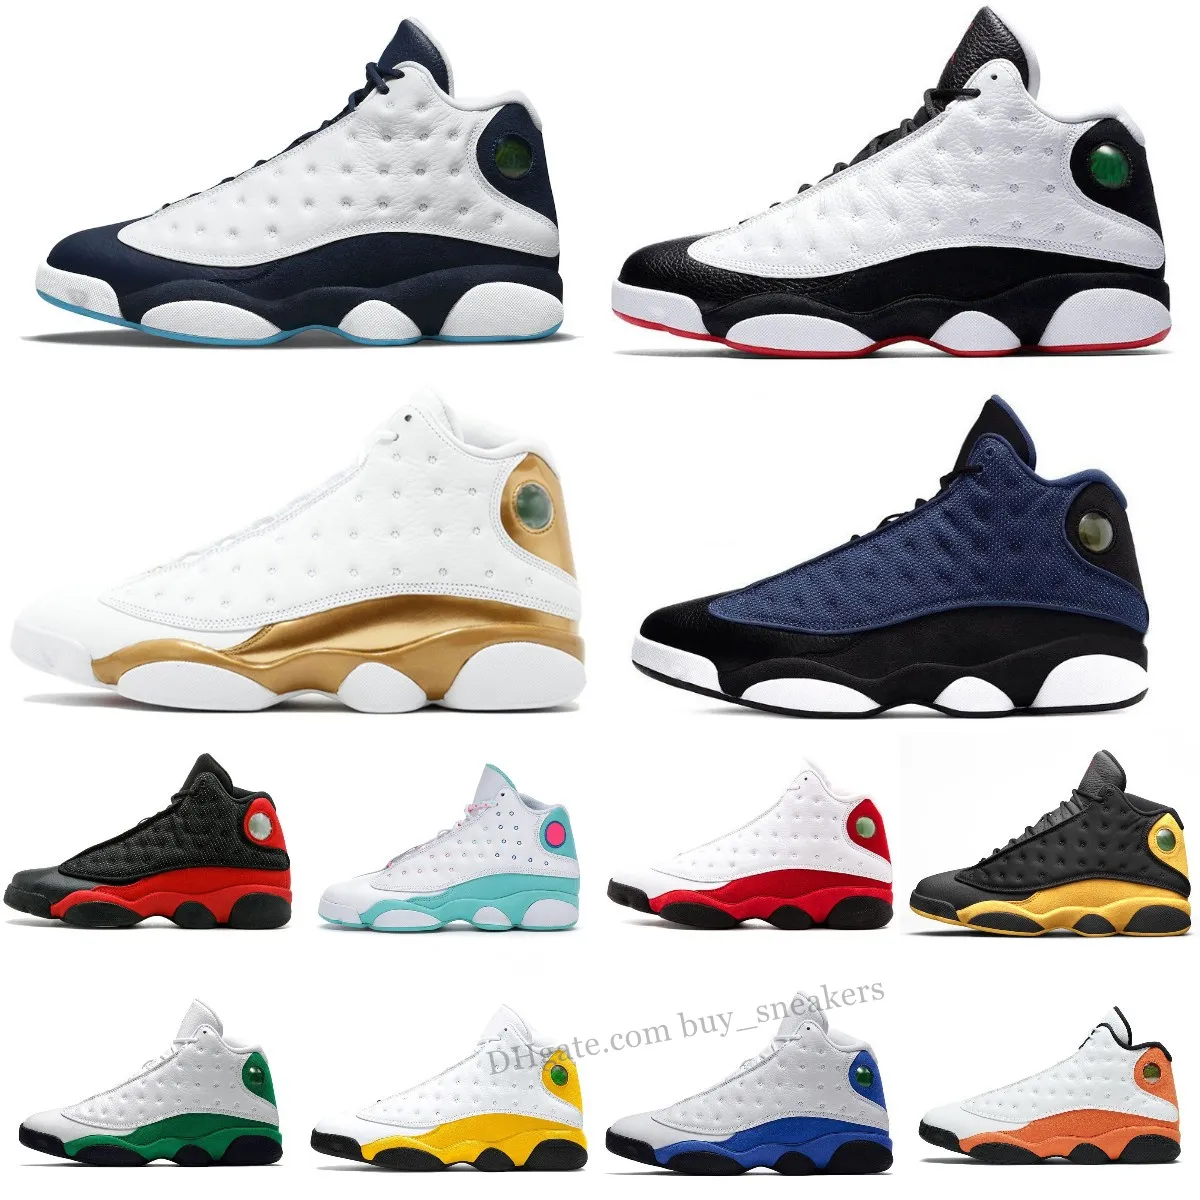 New XIII 13 13s Basketball Shoes Gym Red Flint Hyper Royal French Blue Linen Island Green Obsidian Bred Midnight Navy Purple Yellow Del Sol Barons Black Cat Sneakers